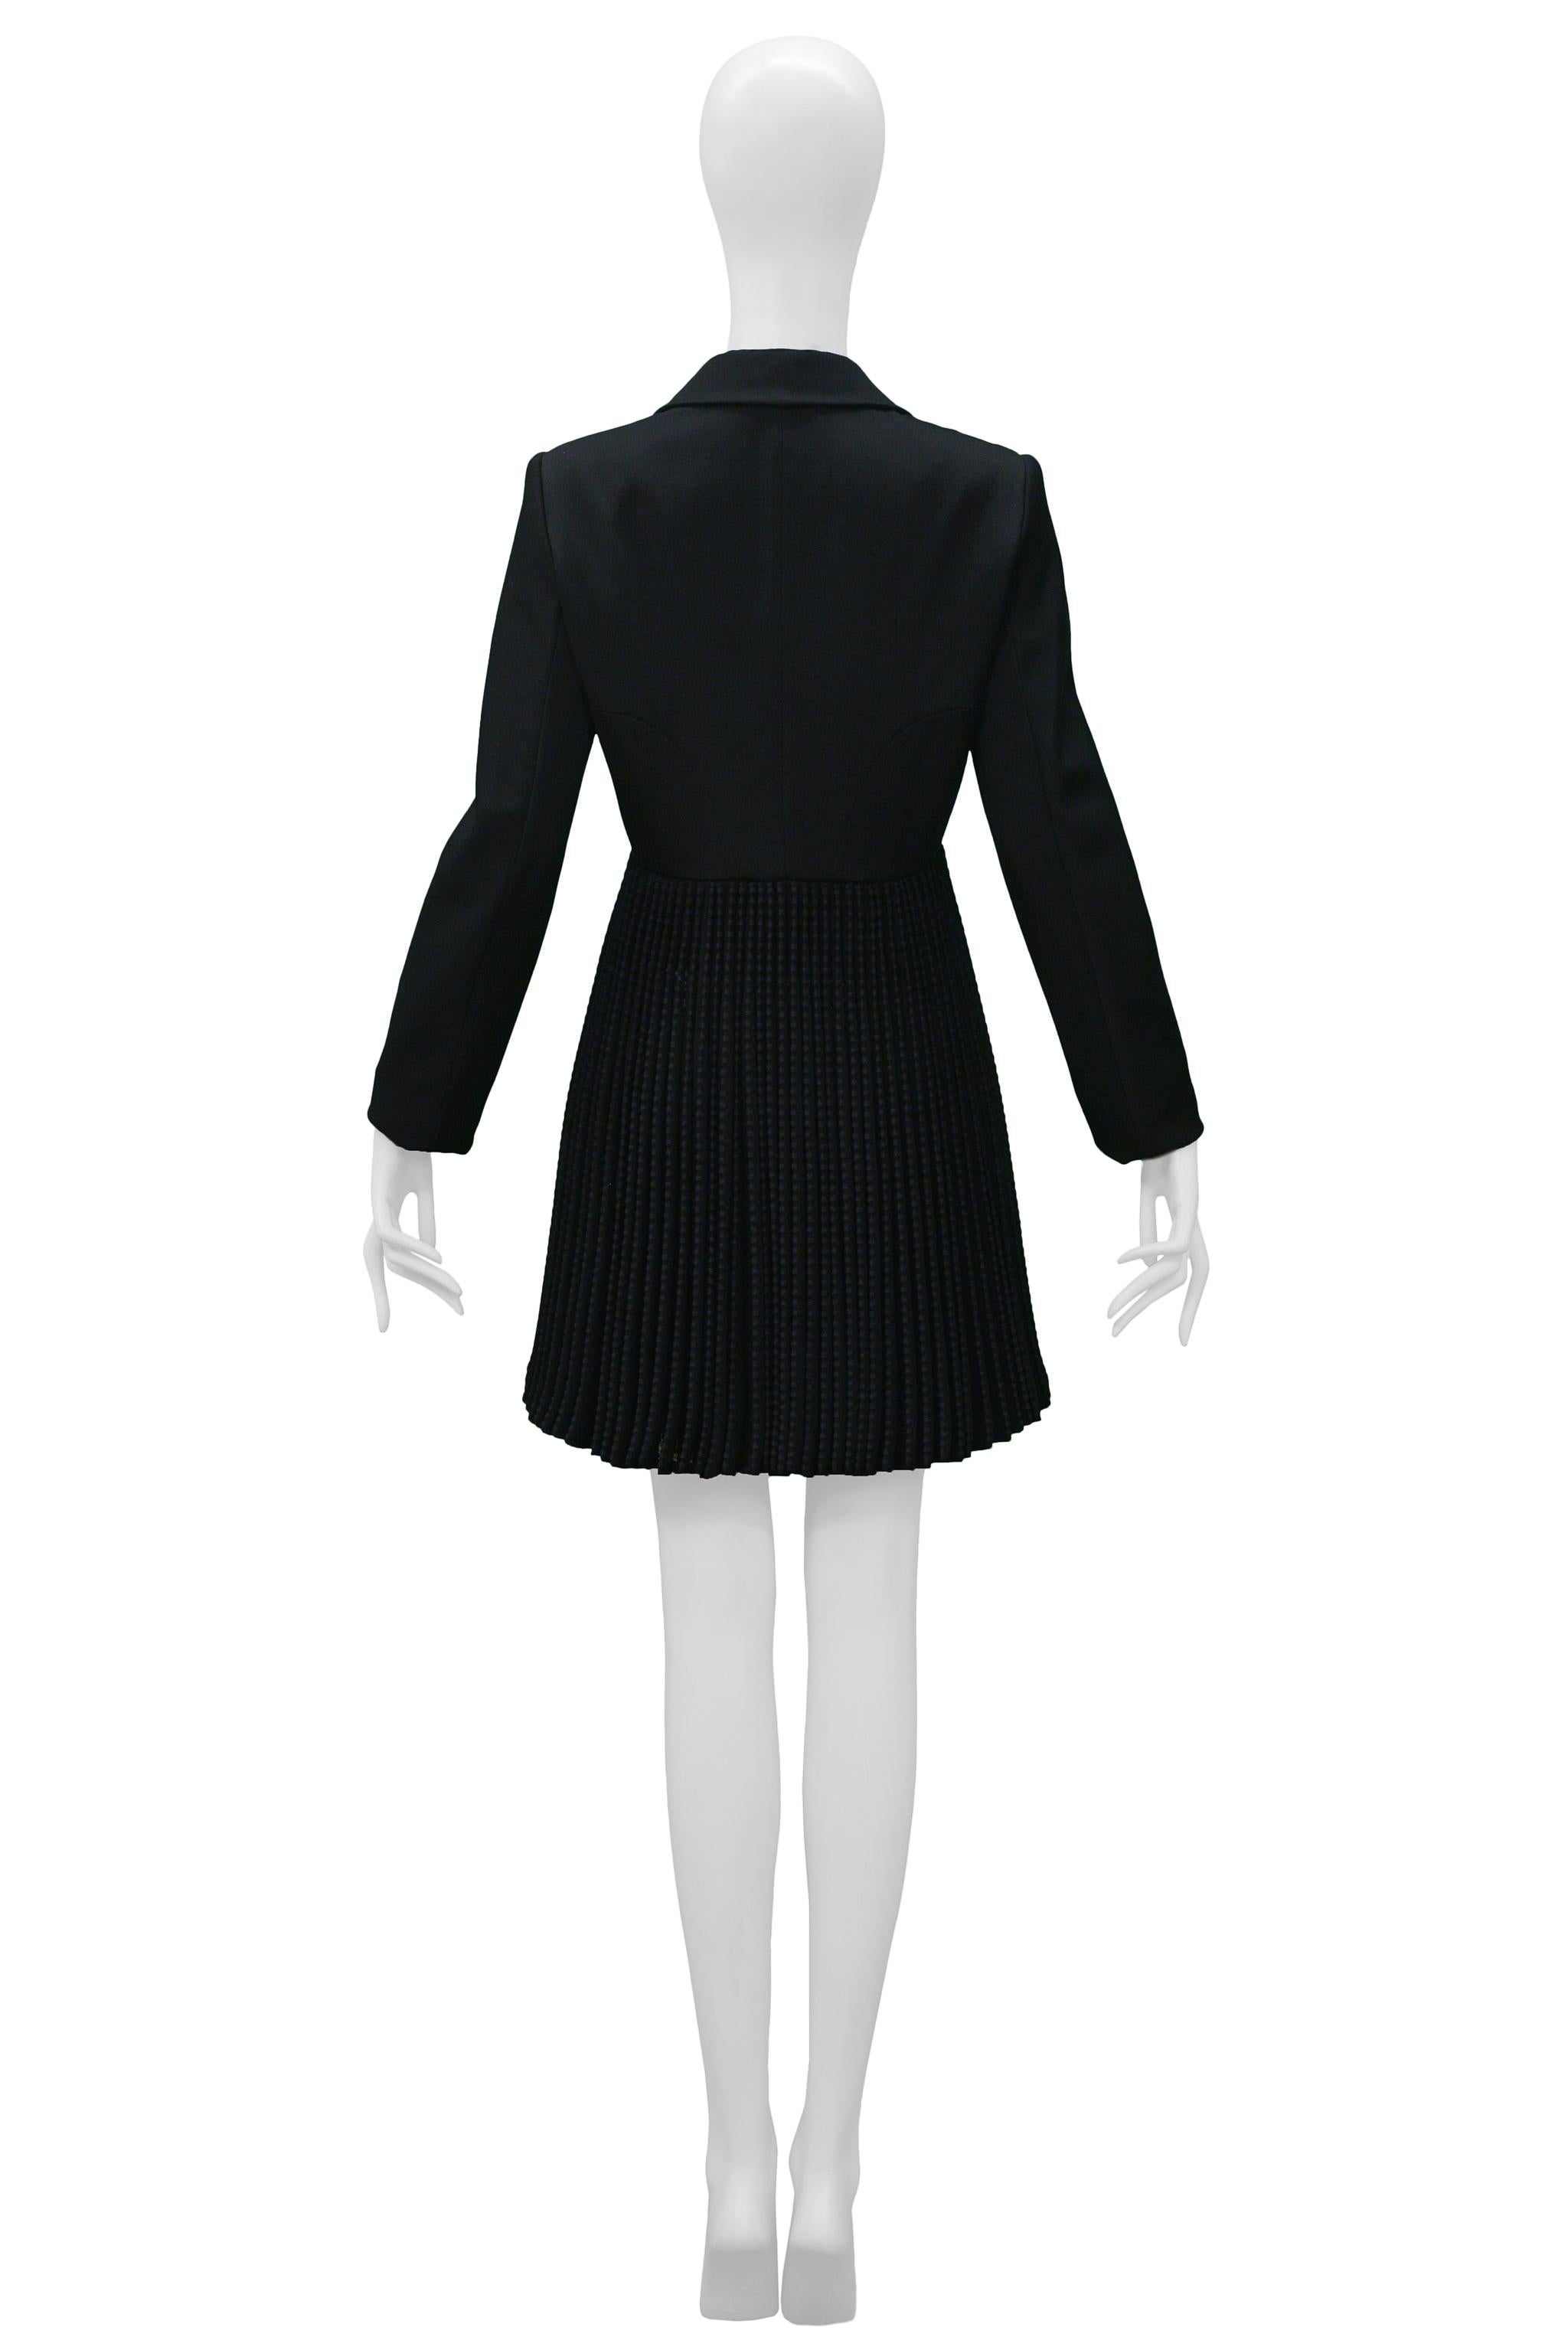 Alaia Black Coat With Pleated Lace Skirt 1